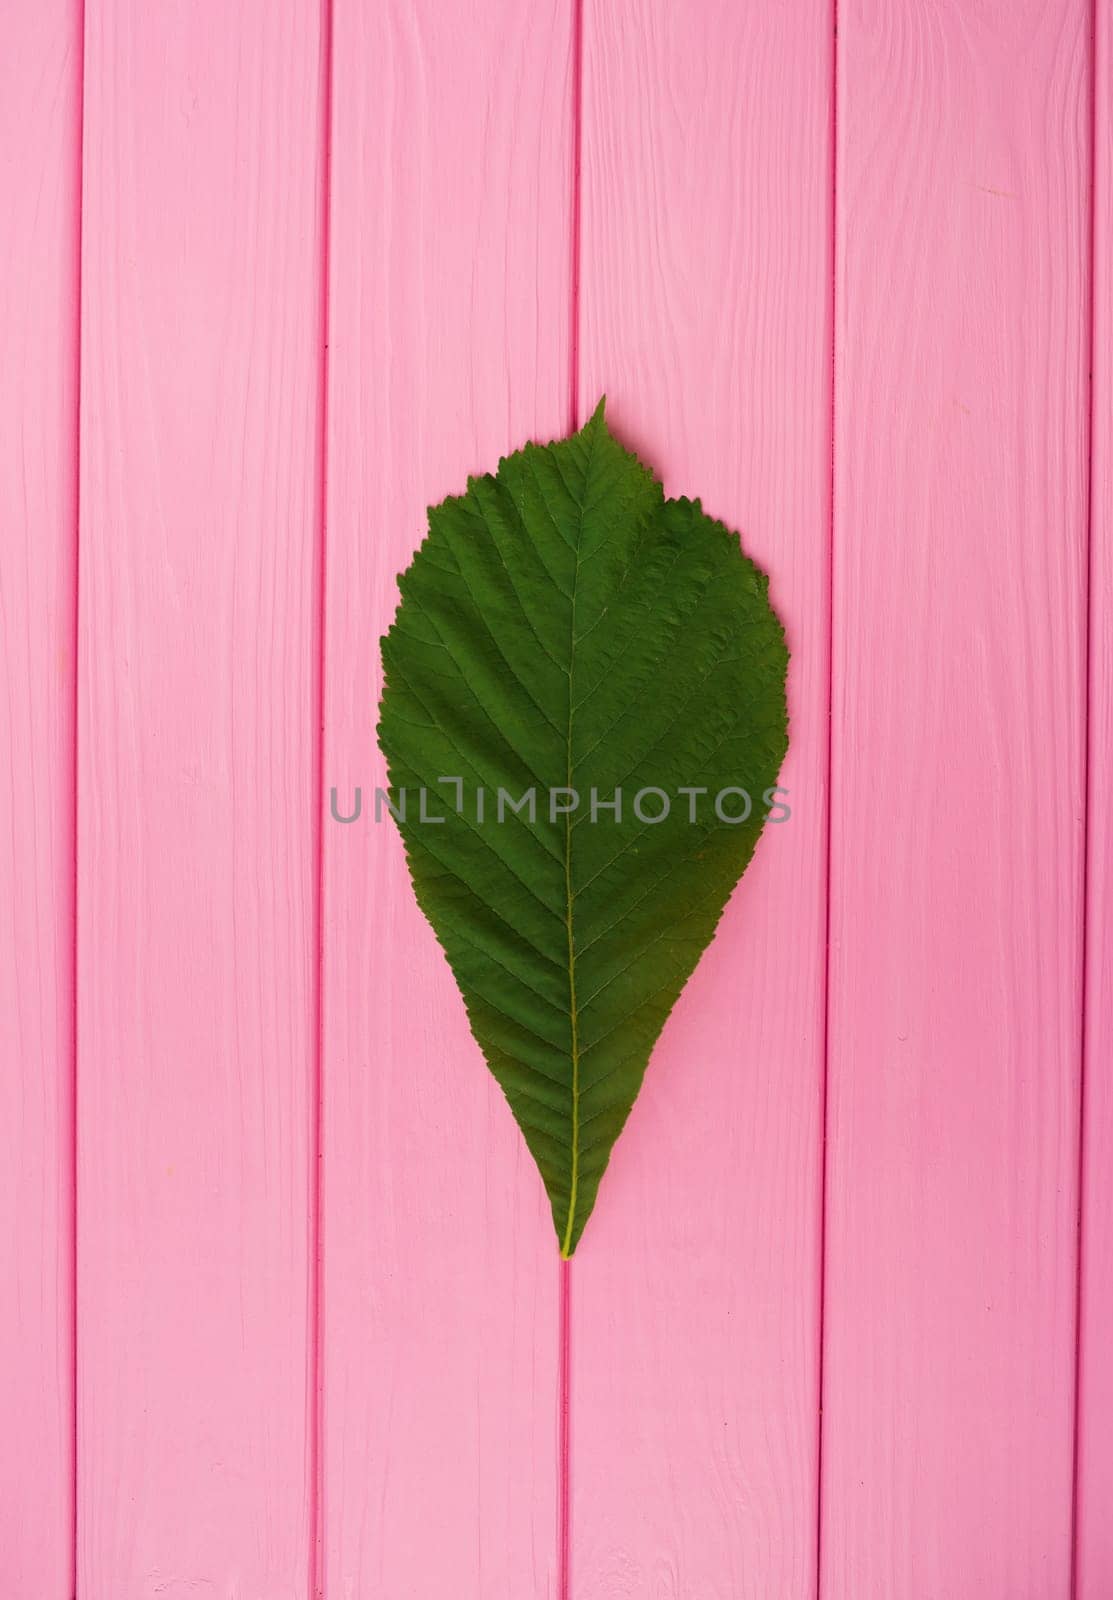 Summer abstract background mockup template free copy space for text pattern sample top view above on pink wooden board. blank empty area for inscription. green chestnut tree leaf isolated close up